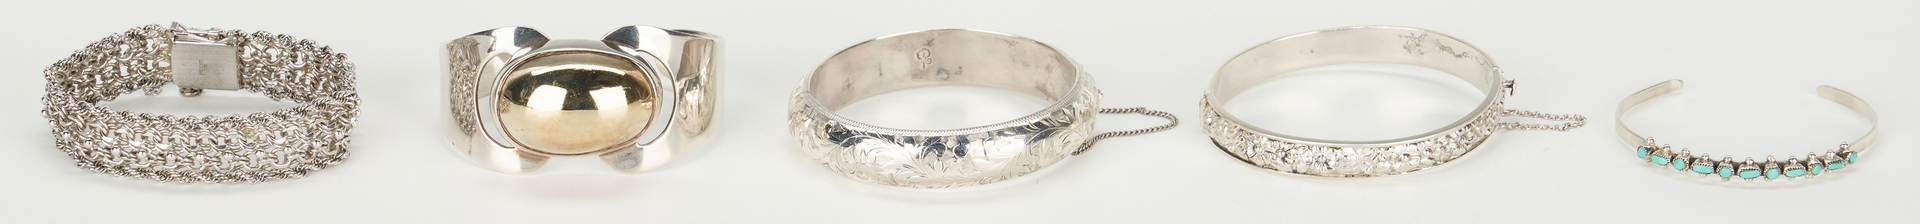 Lot 1042: Designer Sterling jewelry incl. Tiffany, 12 items